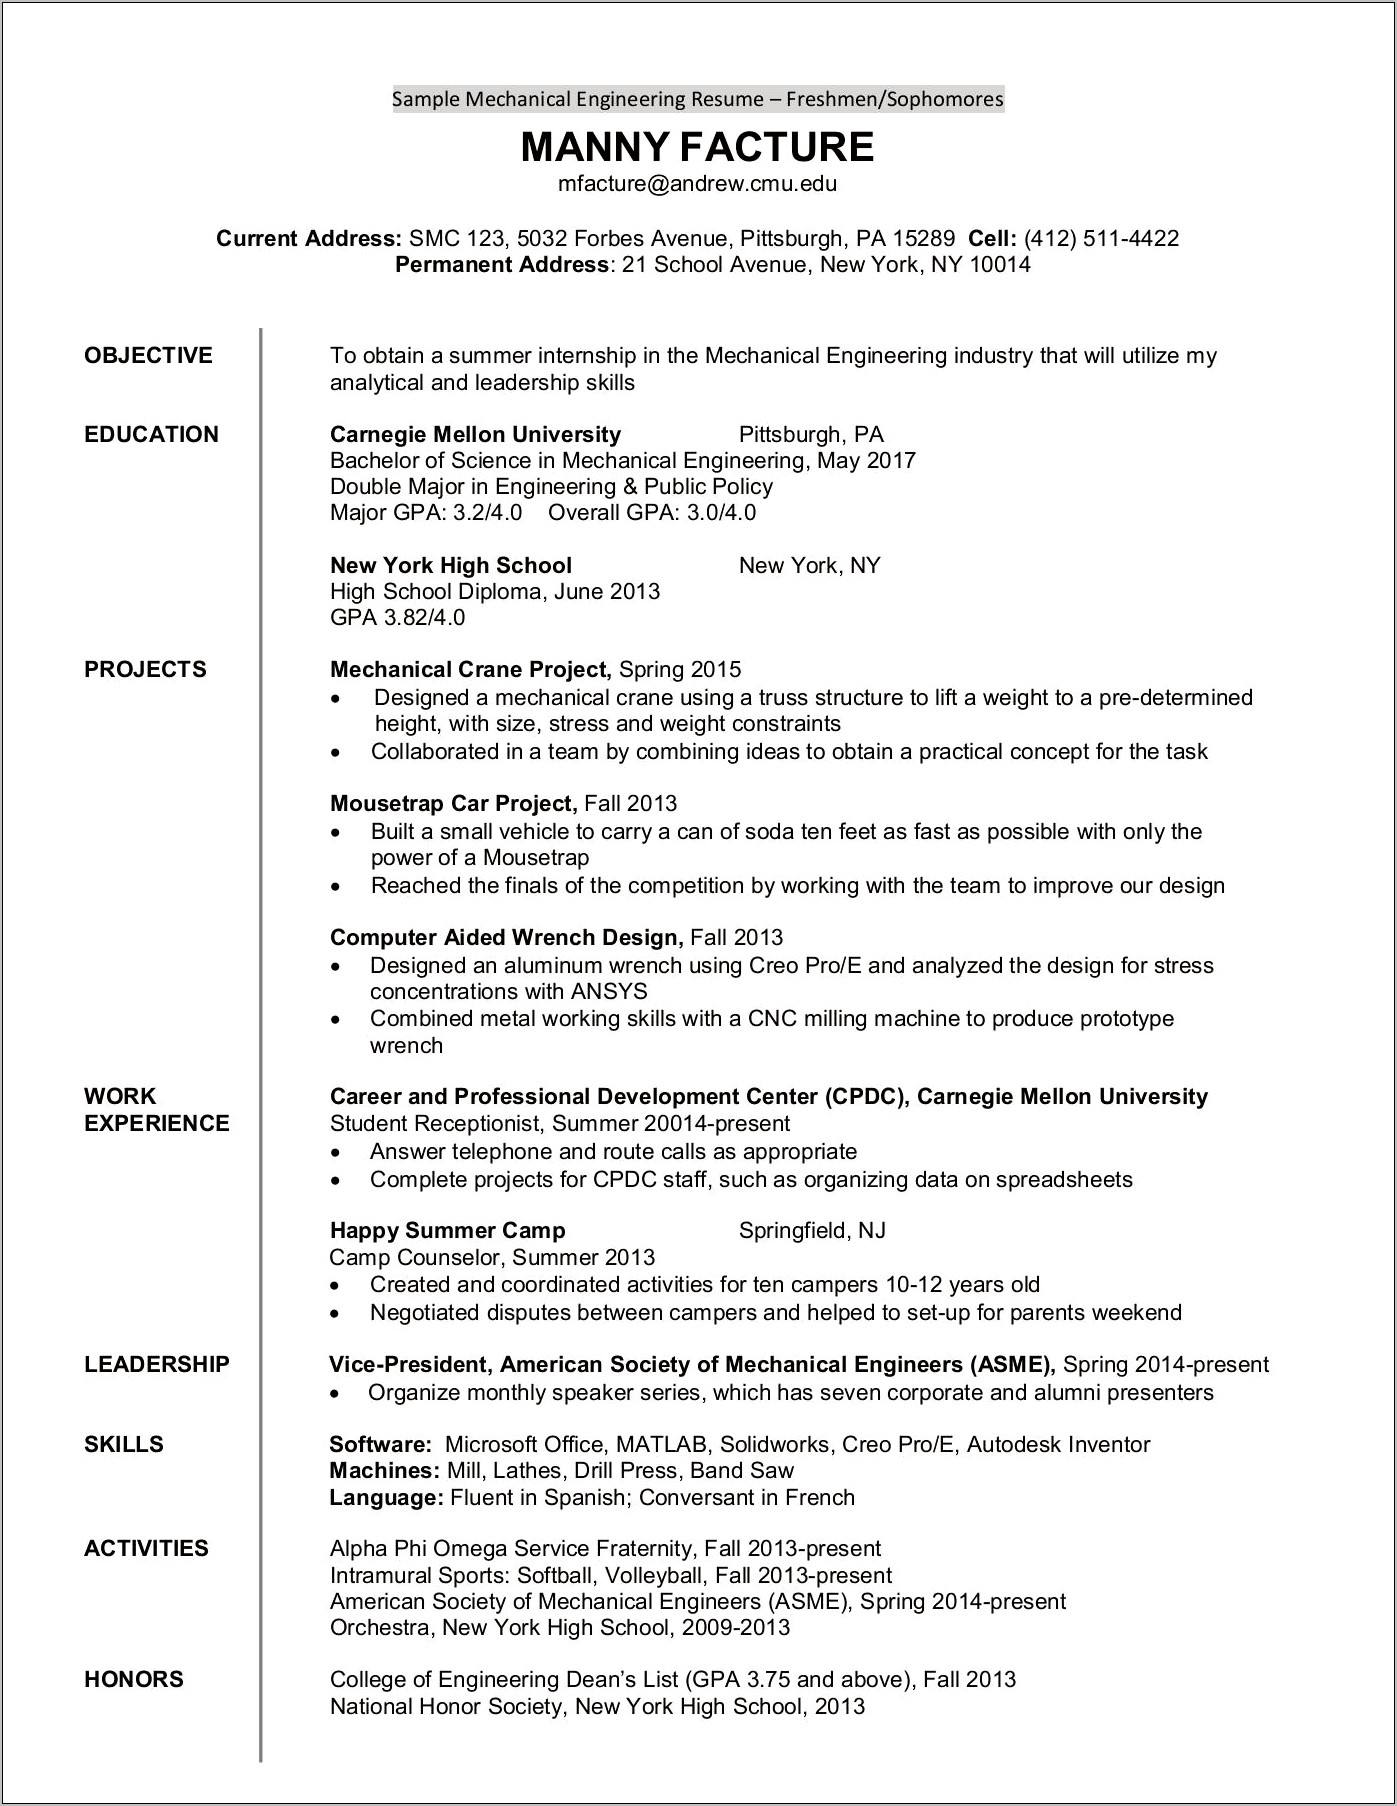 Sample Resume For Sophomores In College